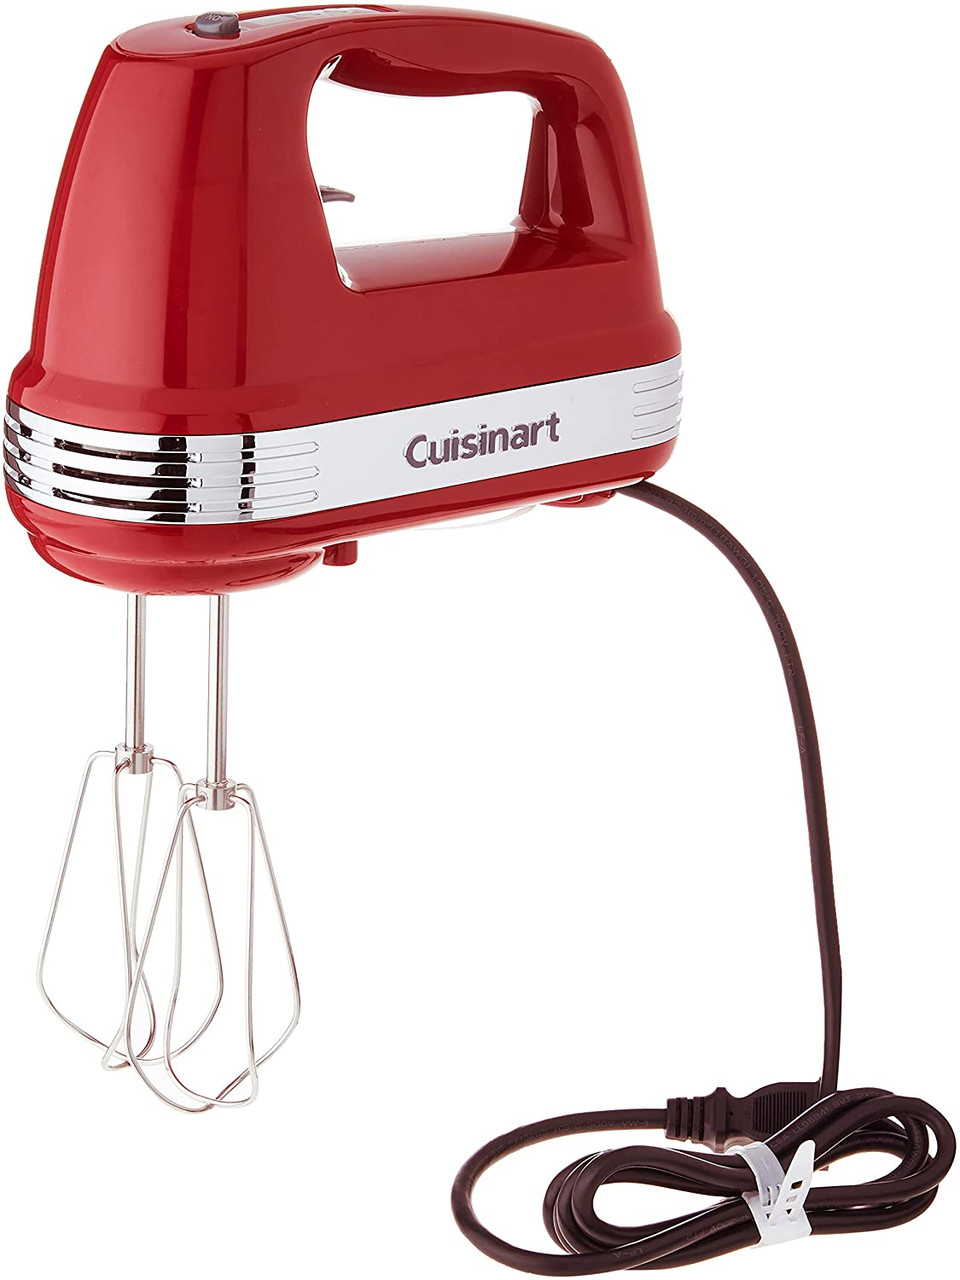 Cuisinart Power Advantage 5-Speed White Hand Mixer with Recipe